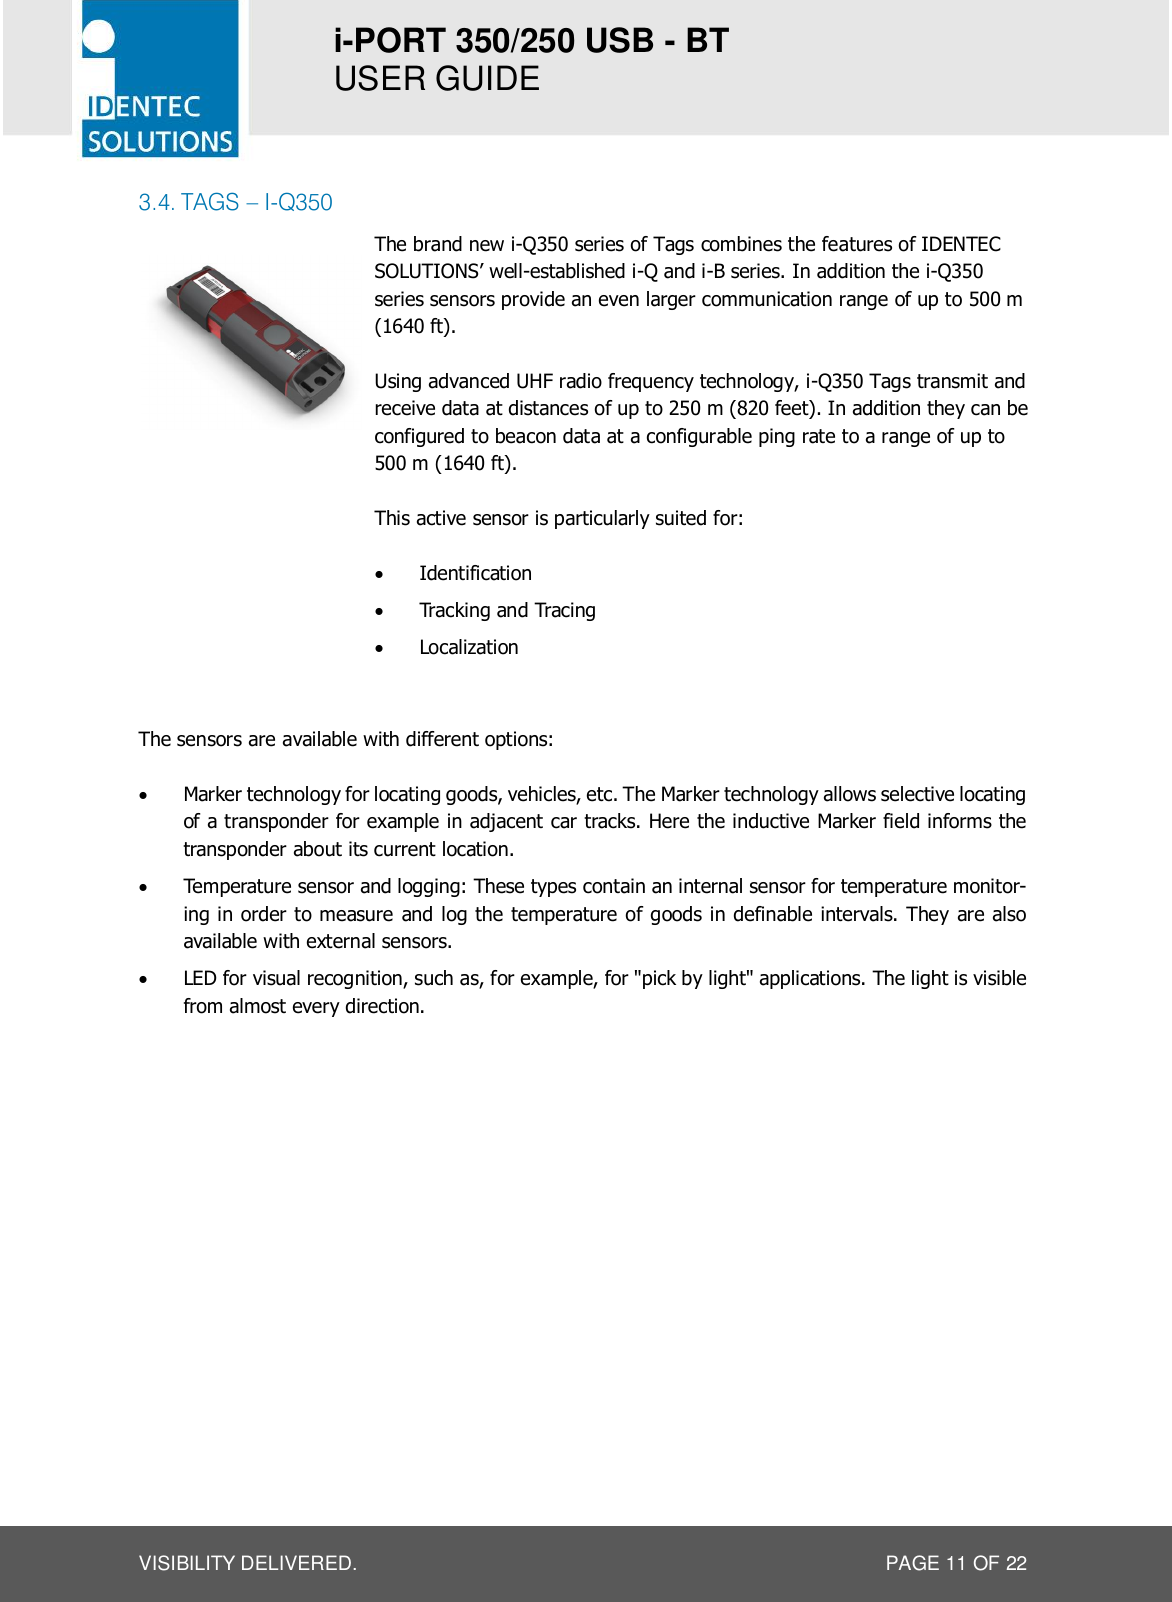 i-PORT 350/250 USB - BT  USER GUIDE  VISIBILITY DELIVERED.  PAGE 11 OF 22 3.4. TAGS – I-Q350   The brand new i-Q350 series of Tags combines the features of IDENTEC SOLUTIONS’ well-established i-Q and i-B series. In addition the i-Q350 series sensors provide an even larger communication range of up to 500 m (1640 ft).  Using advanced UHF radio frequency technology, i-Q350 Tags transmit and receive data at distances of up to 250 m (820 feet). In addition they can be configured to beacon data at a configurable ping rate to a range of up to 500 m (1640 ft).  This active sensor is particularly suited for:  · Identification · Tracking and Tracing · Localization   The sensors are available with different options:  · Marker technology for locating goods, vehicles, etc. The Marker technology allows selective locating of a transponder for example in adjacent car tracks. Here the inductive Marker field informs the transponder about its current location. · Temperature sensor and logging: These types contain an internal sensor for temperature monitor-ing in order to measure and log the temperature of goods in definable intervals. They are also available with external sensors. · LED for visual recognition, such as, for example, for &quot;pick by light&quot; applications. The light is visible from almost every direction.   